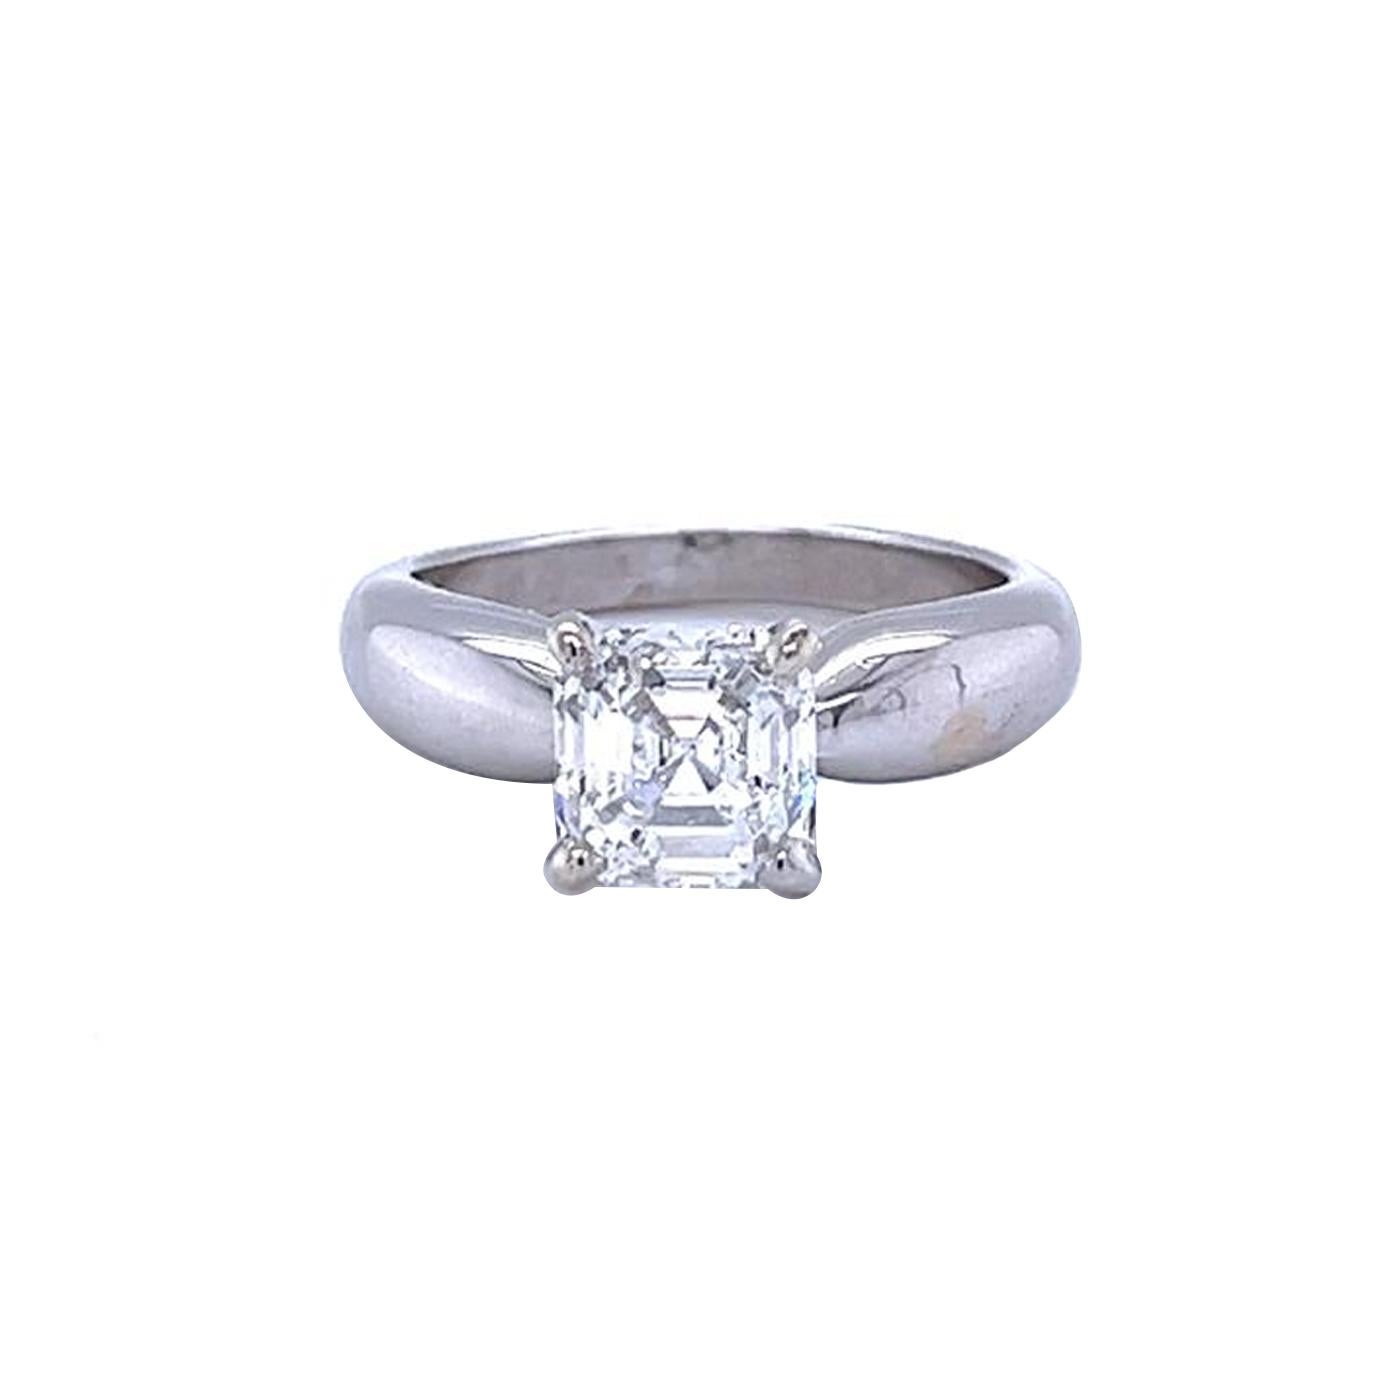 Flawless GIA Certified 2.01 Carat Asscher Cut Diamond Ring 18 Karat White Gold In Excellent Condition For Sale In Aventura, FL